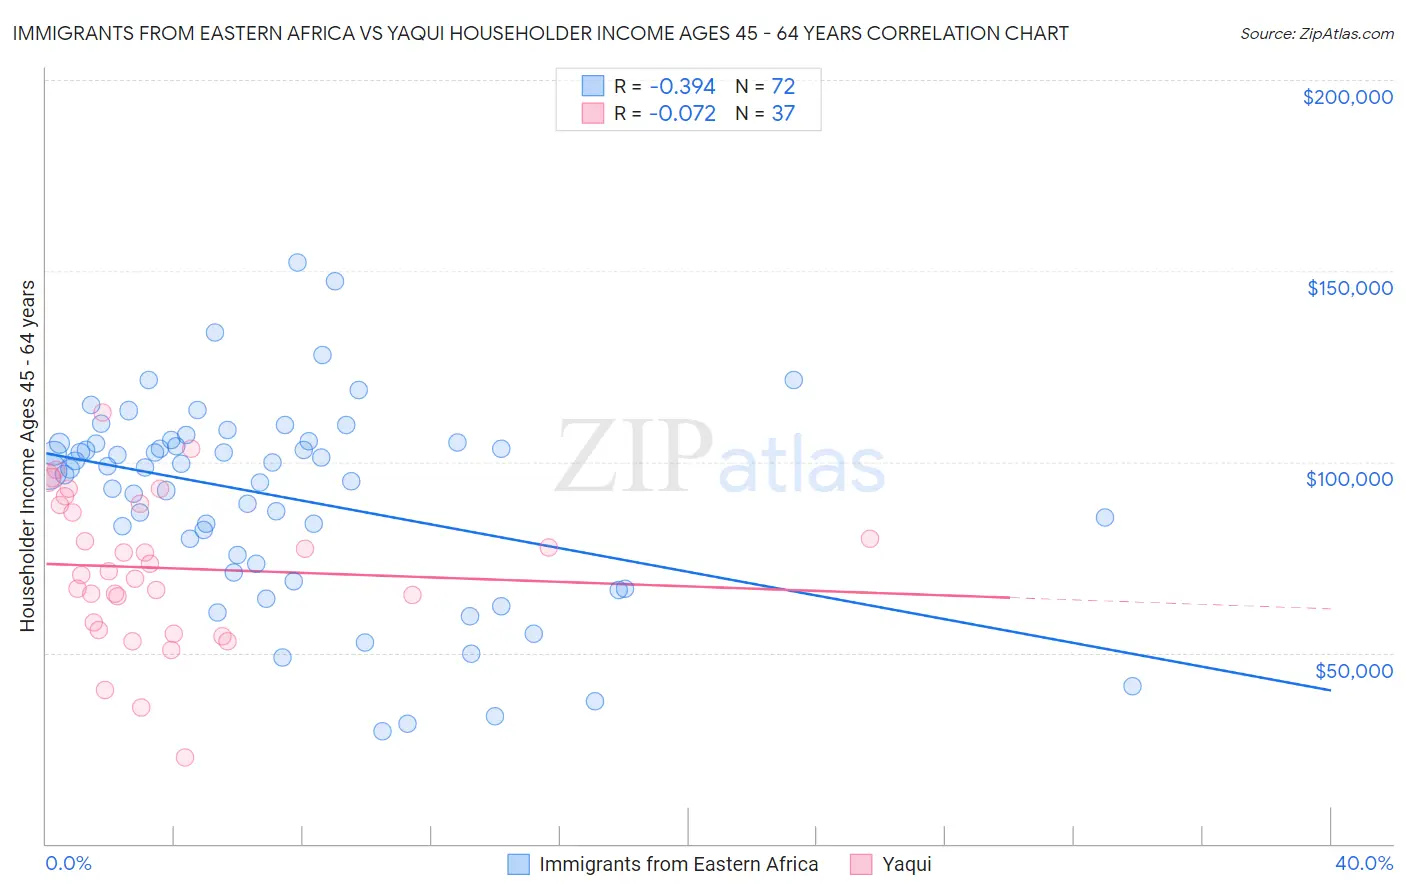 Immigrants from Eastern Africa vs Yaqui Householder Income Ages 45 - 64 years